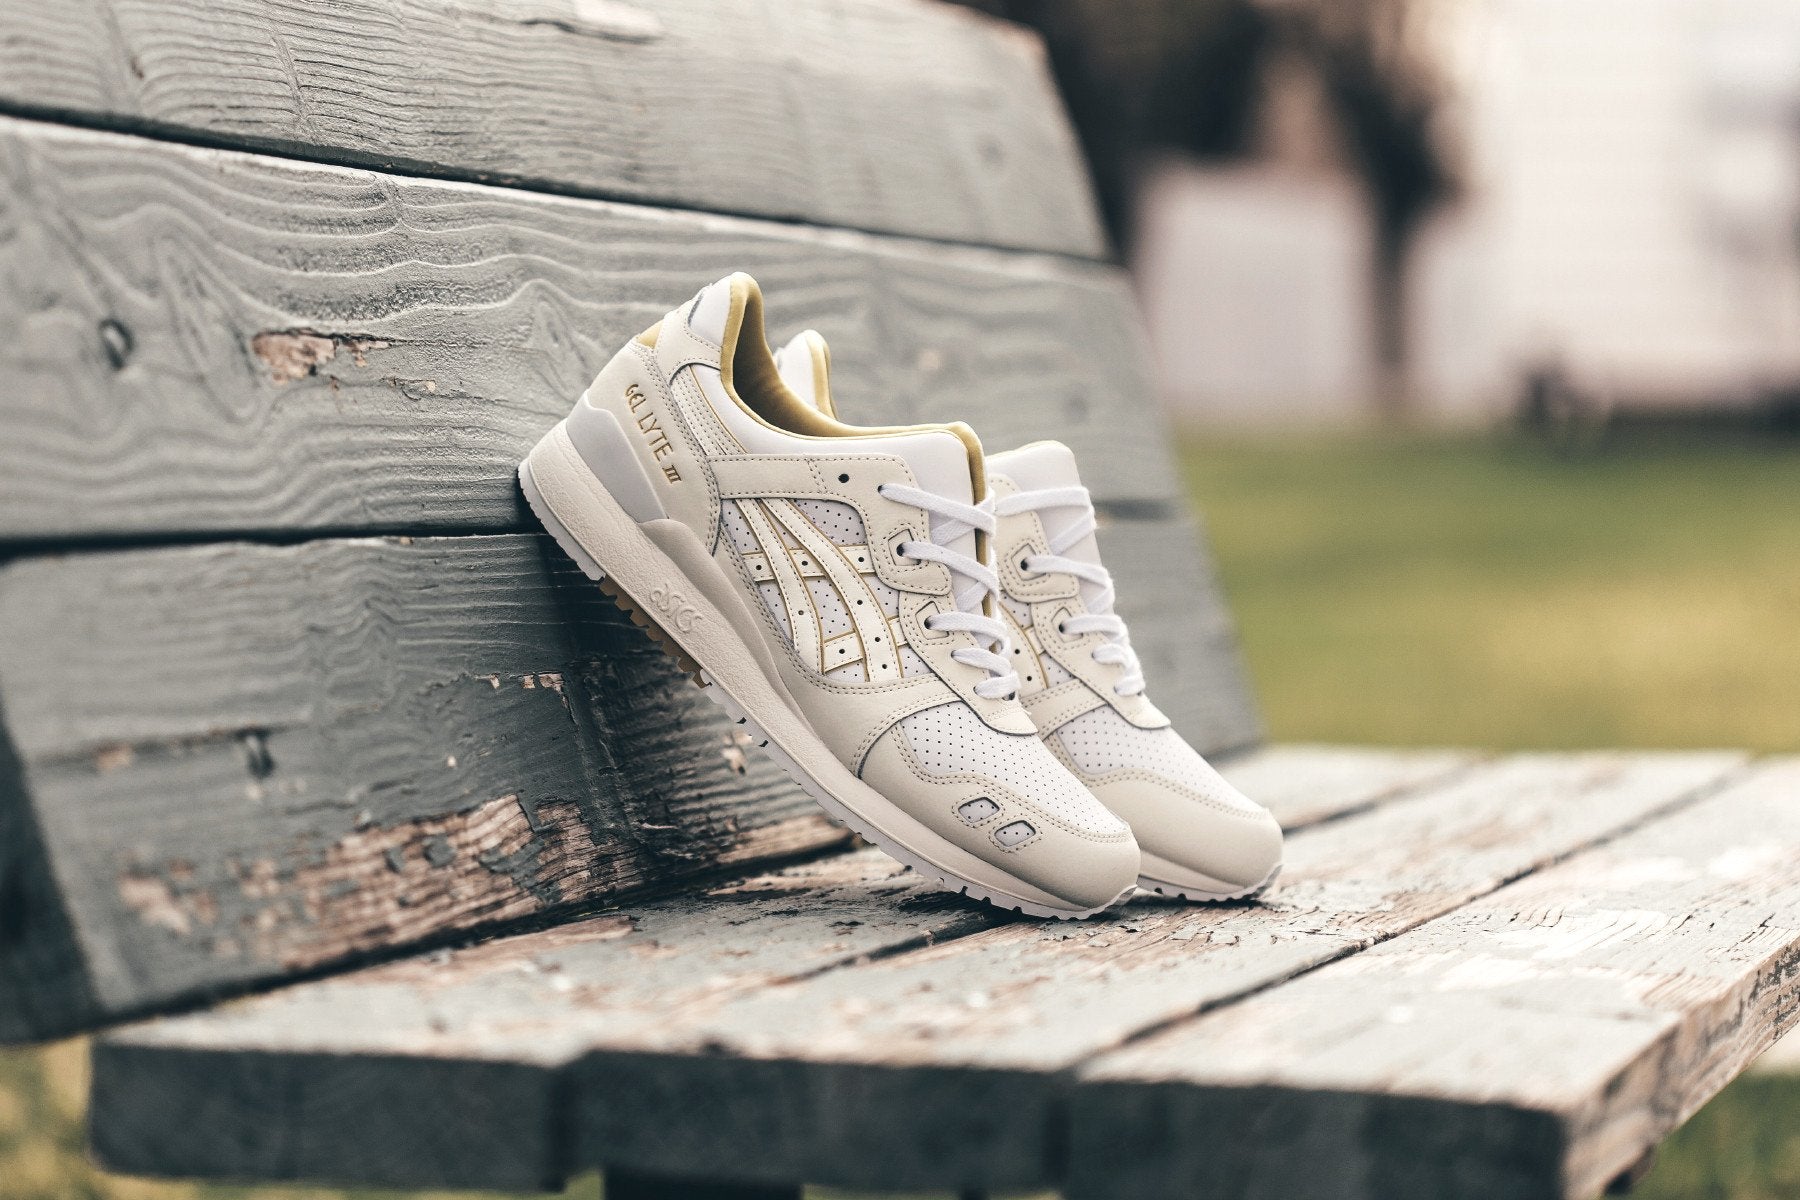 Gel-Lyte III "White/Cream" Available Now – Feature